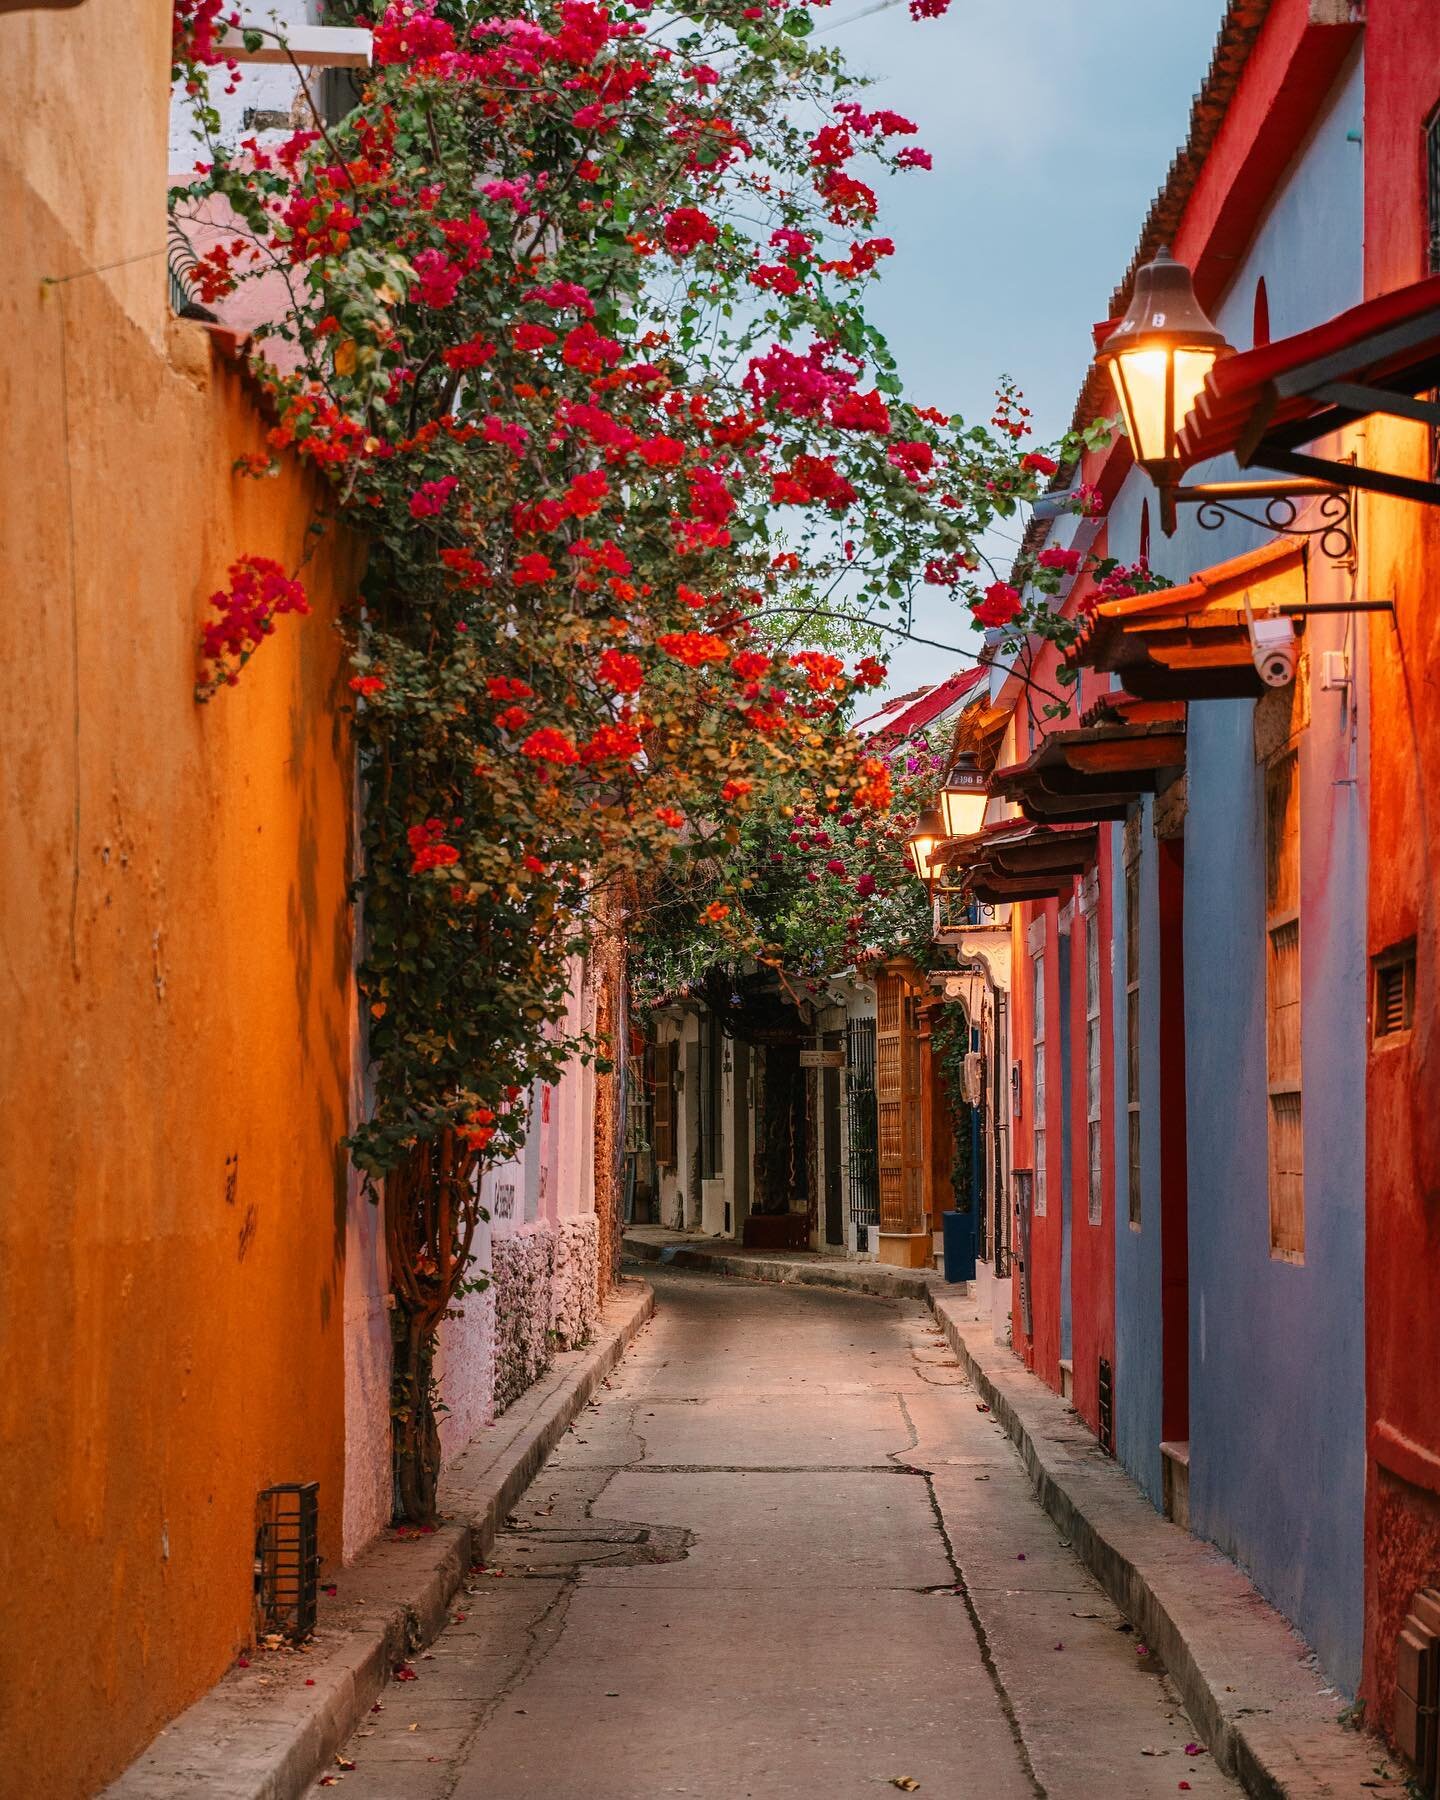 💛💙❤️ Cartagena and its magical streets 😍

Wandering around Cartagena&rsquo;s historic centre and colourful streets is an experience in itself. Every corner is a new opportunity to be surprised.

If this beautiful town is not one of your bucket lis